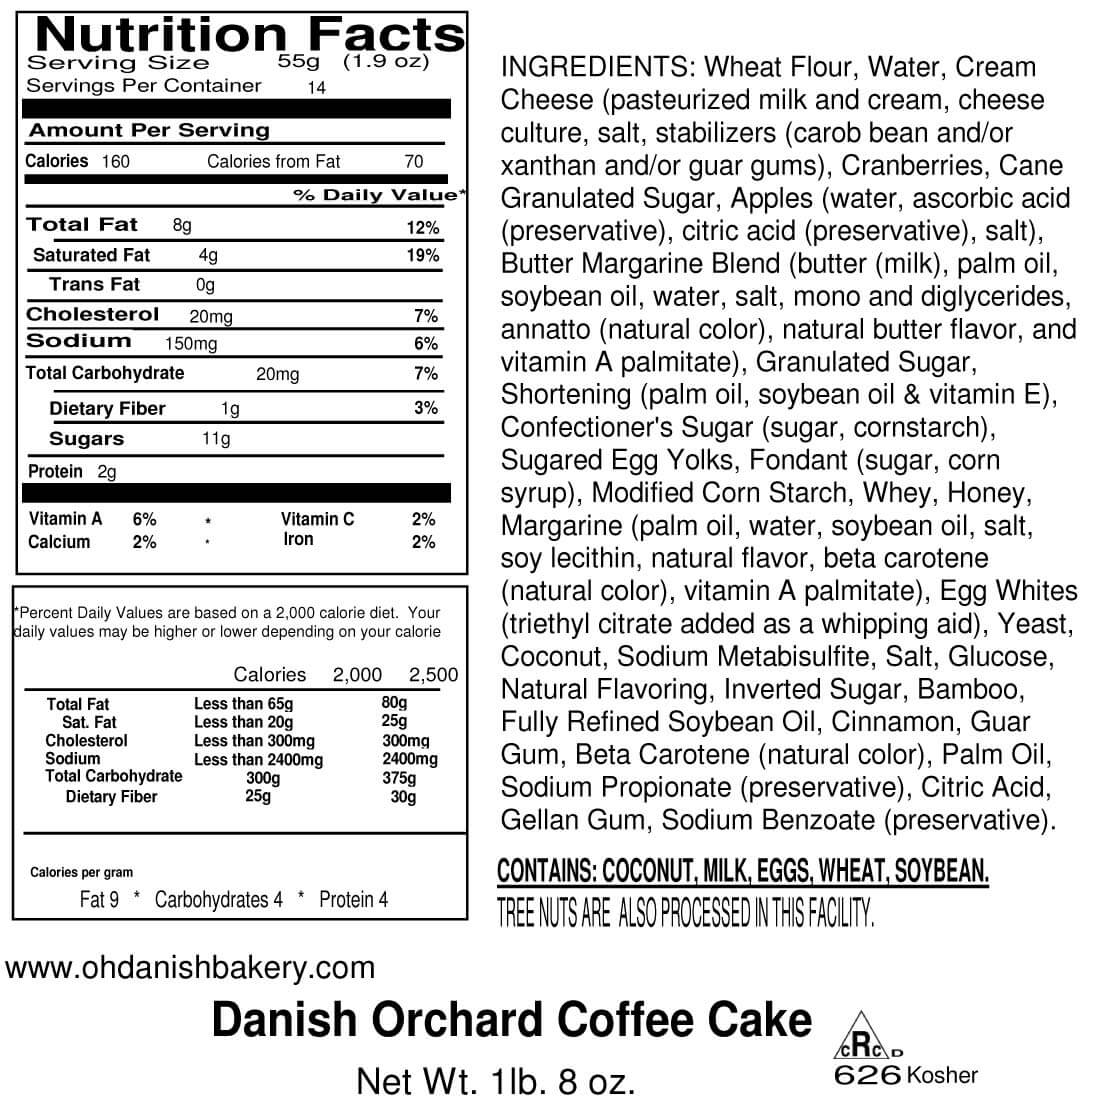 Nutritional Label for Danish Orchard Coffee Cake